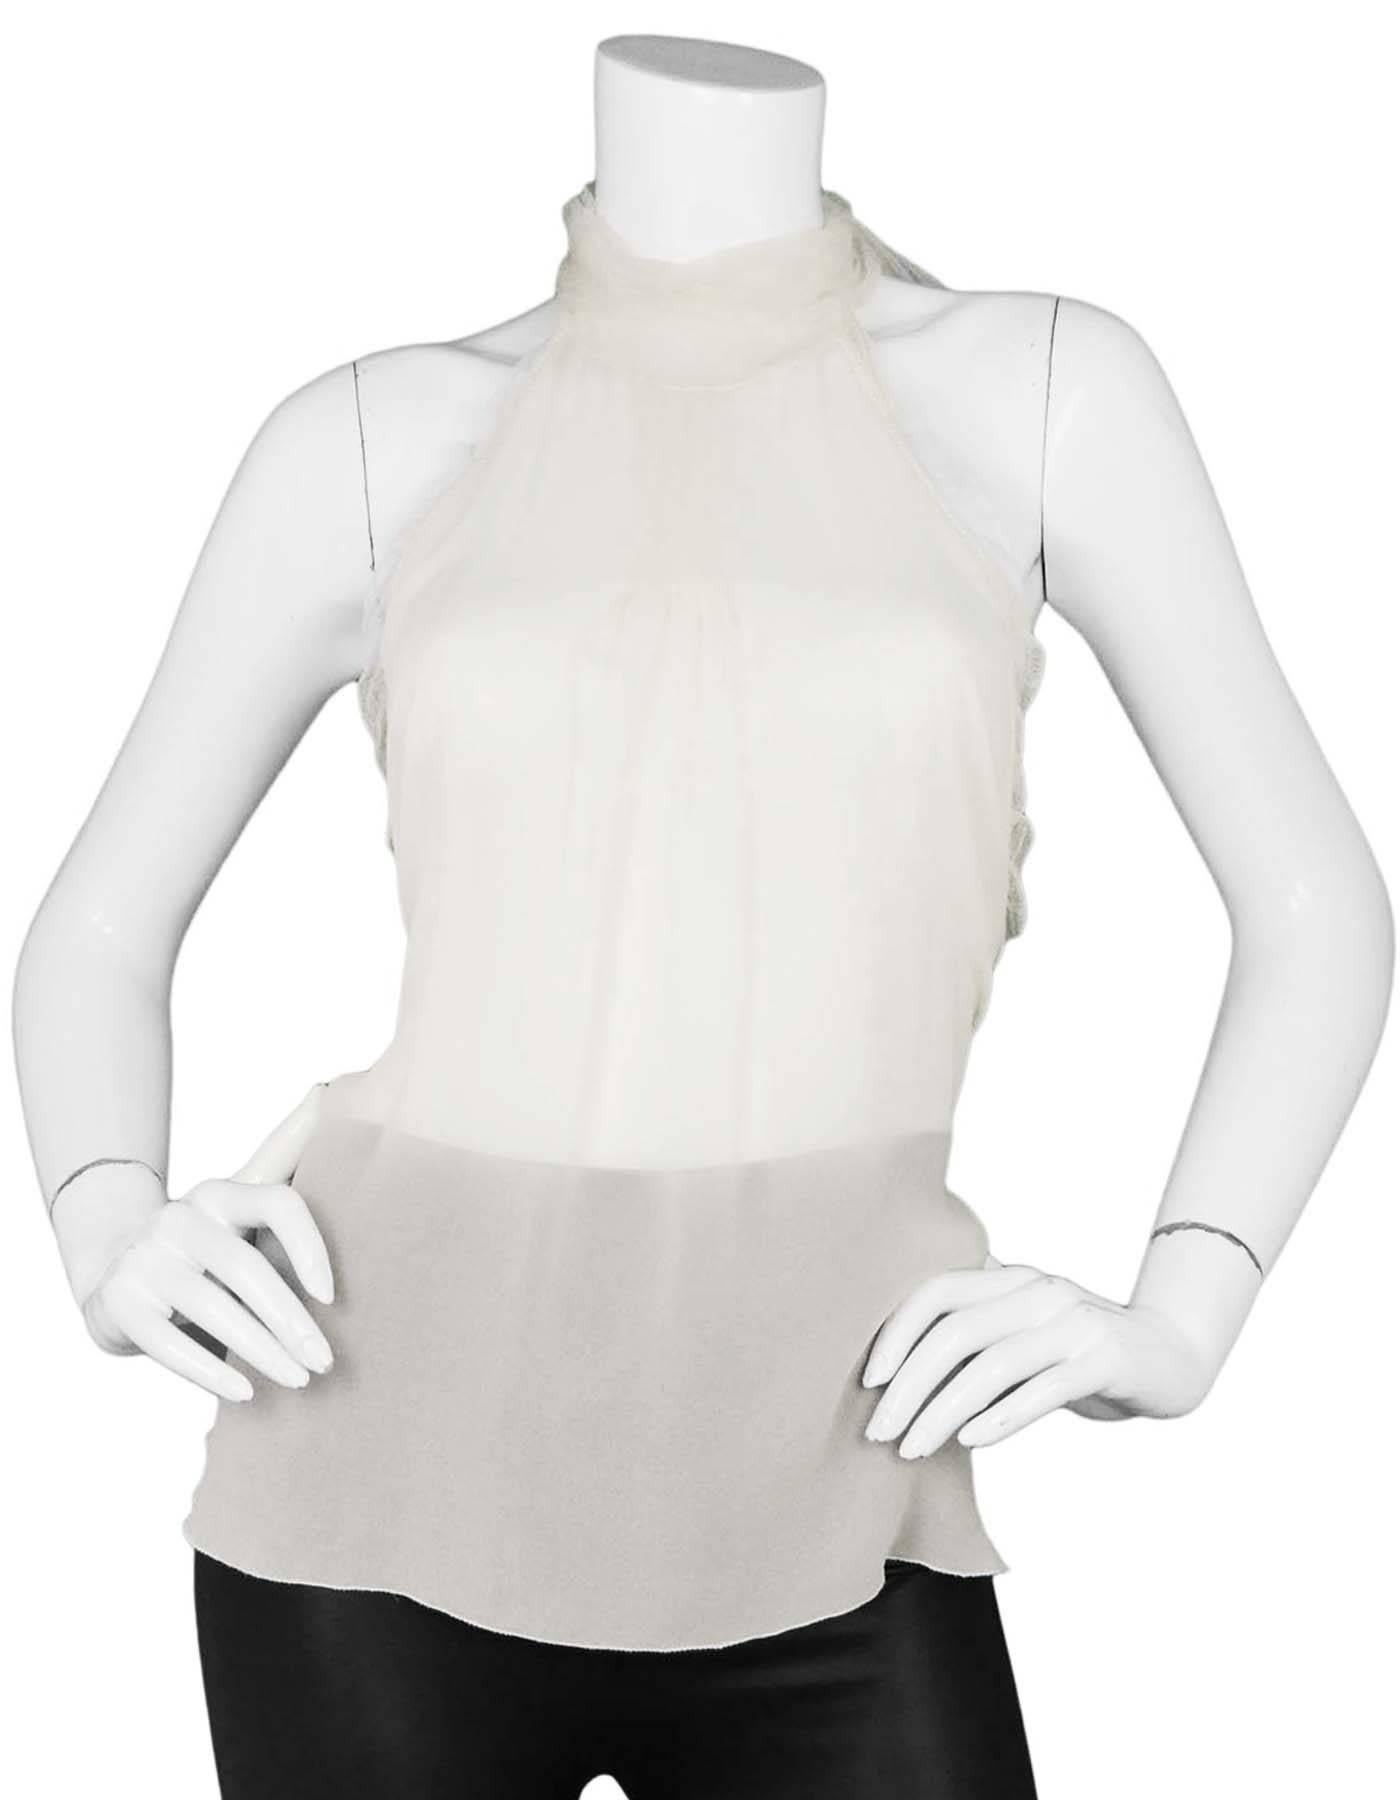 Chanel Sheer Ivory Silk Halter Top 
Features pleating at front

Made In: Italy
Year Of Production: 2005 Autumn
Color: Ivory
Composition: 100% Silk
Lining: None
Closure/Opening: Tie closure at neck and back
Overall Condition: Excellent pre-owned